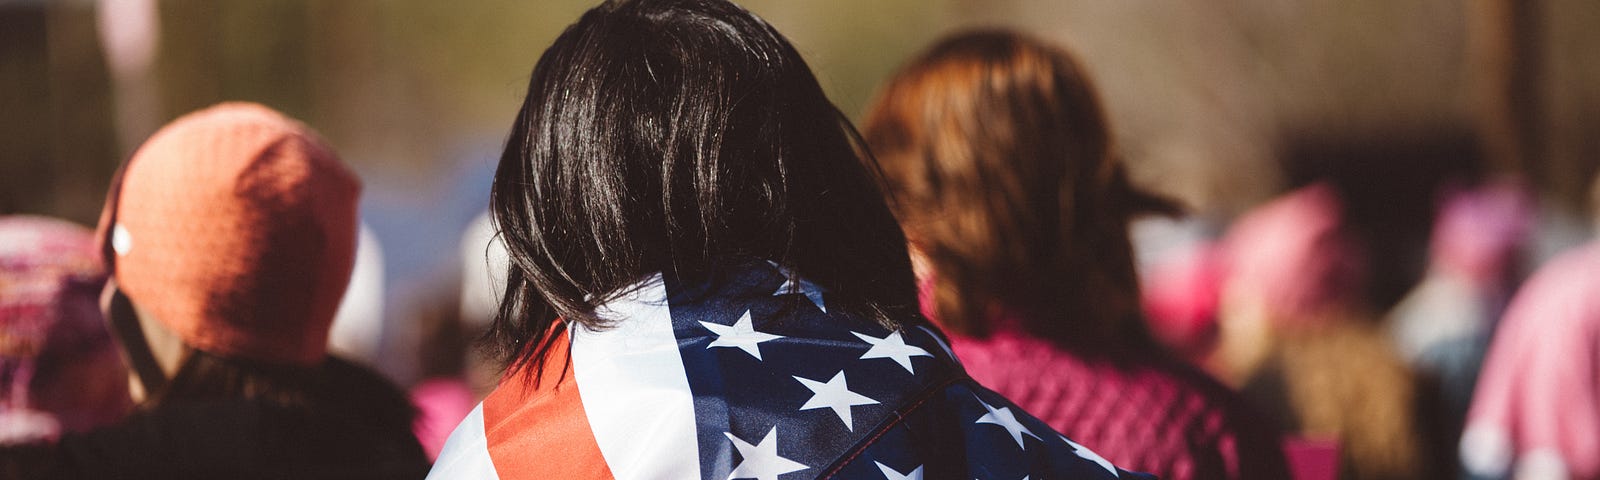 Dark haired woman with back to the camera marches at protest, wrapped in the American flag.